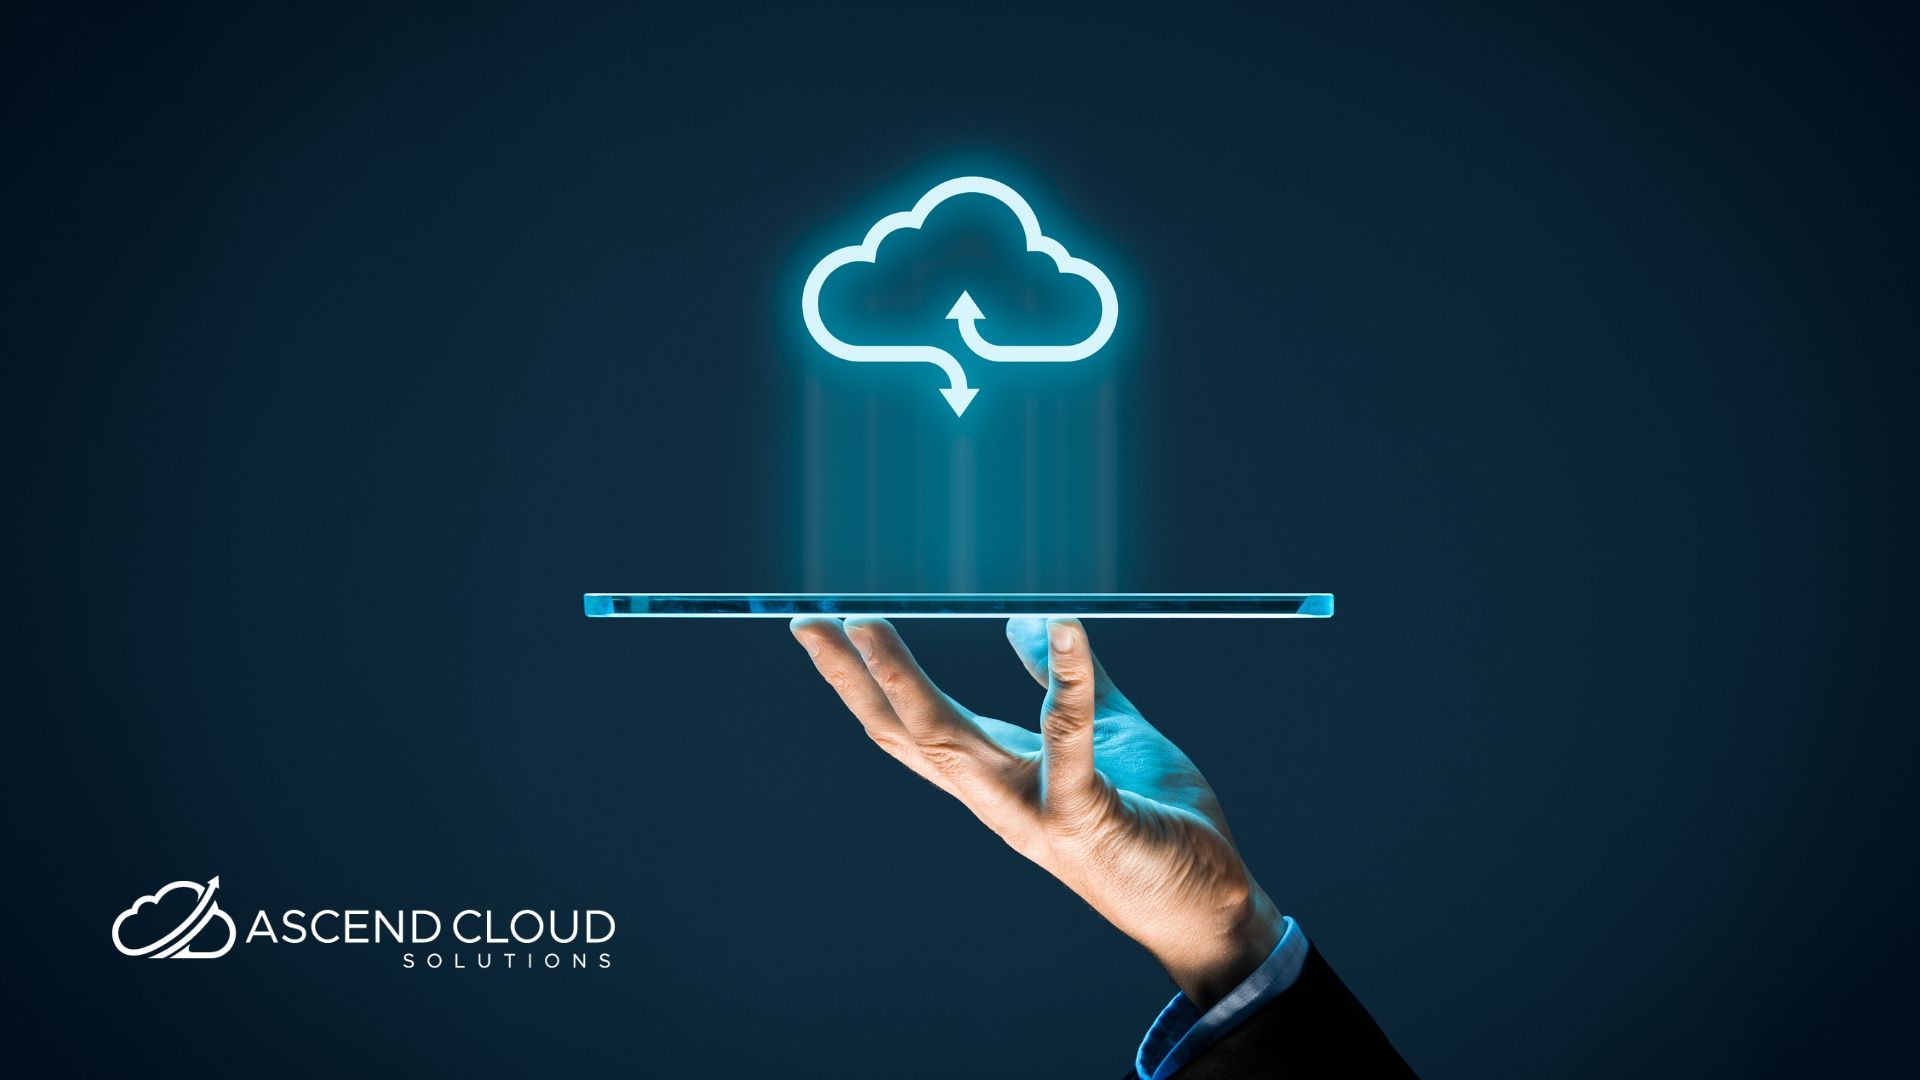 Are you ready to migrate your workloads to the cloud? Explore how to make this part of a cloud-first culture in our handy explainer on the subject.